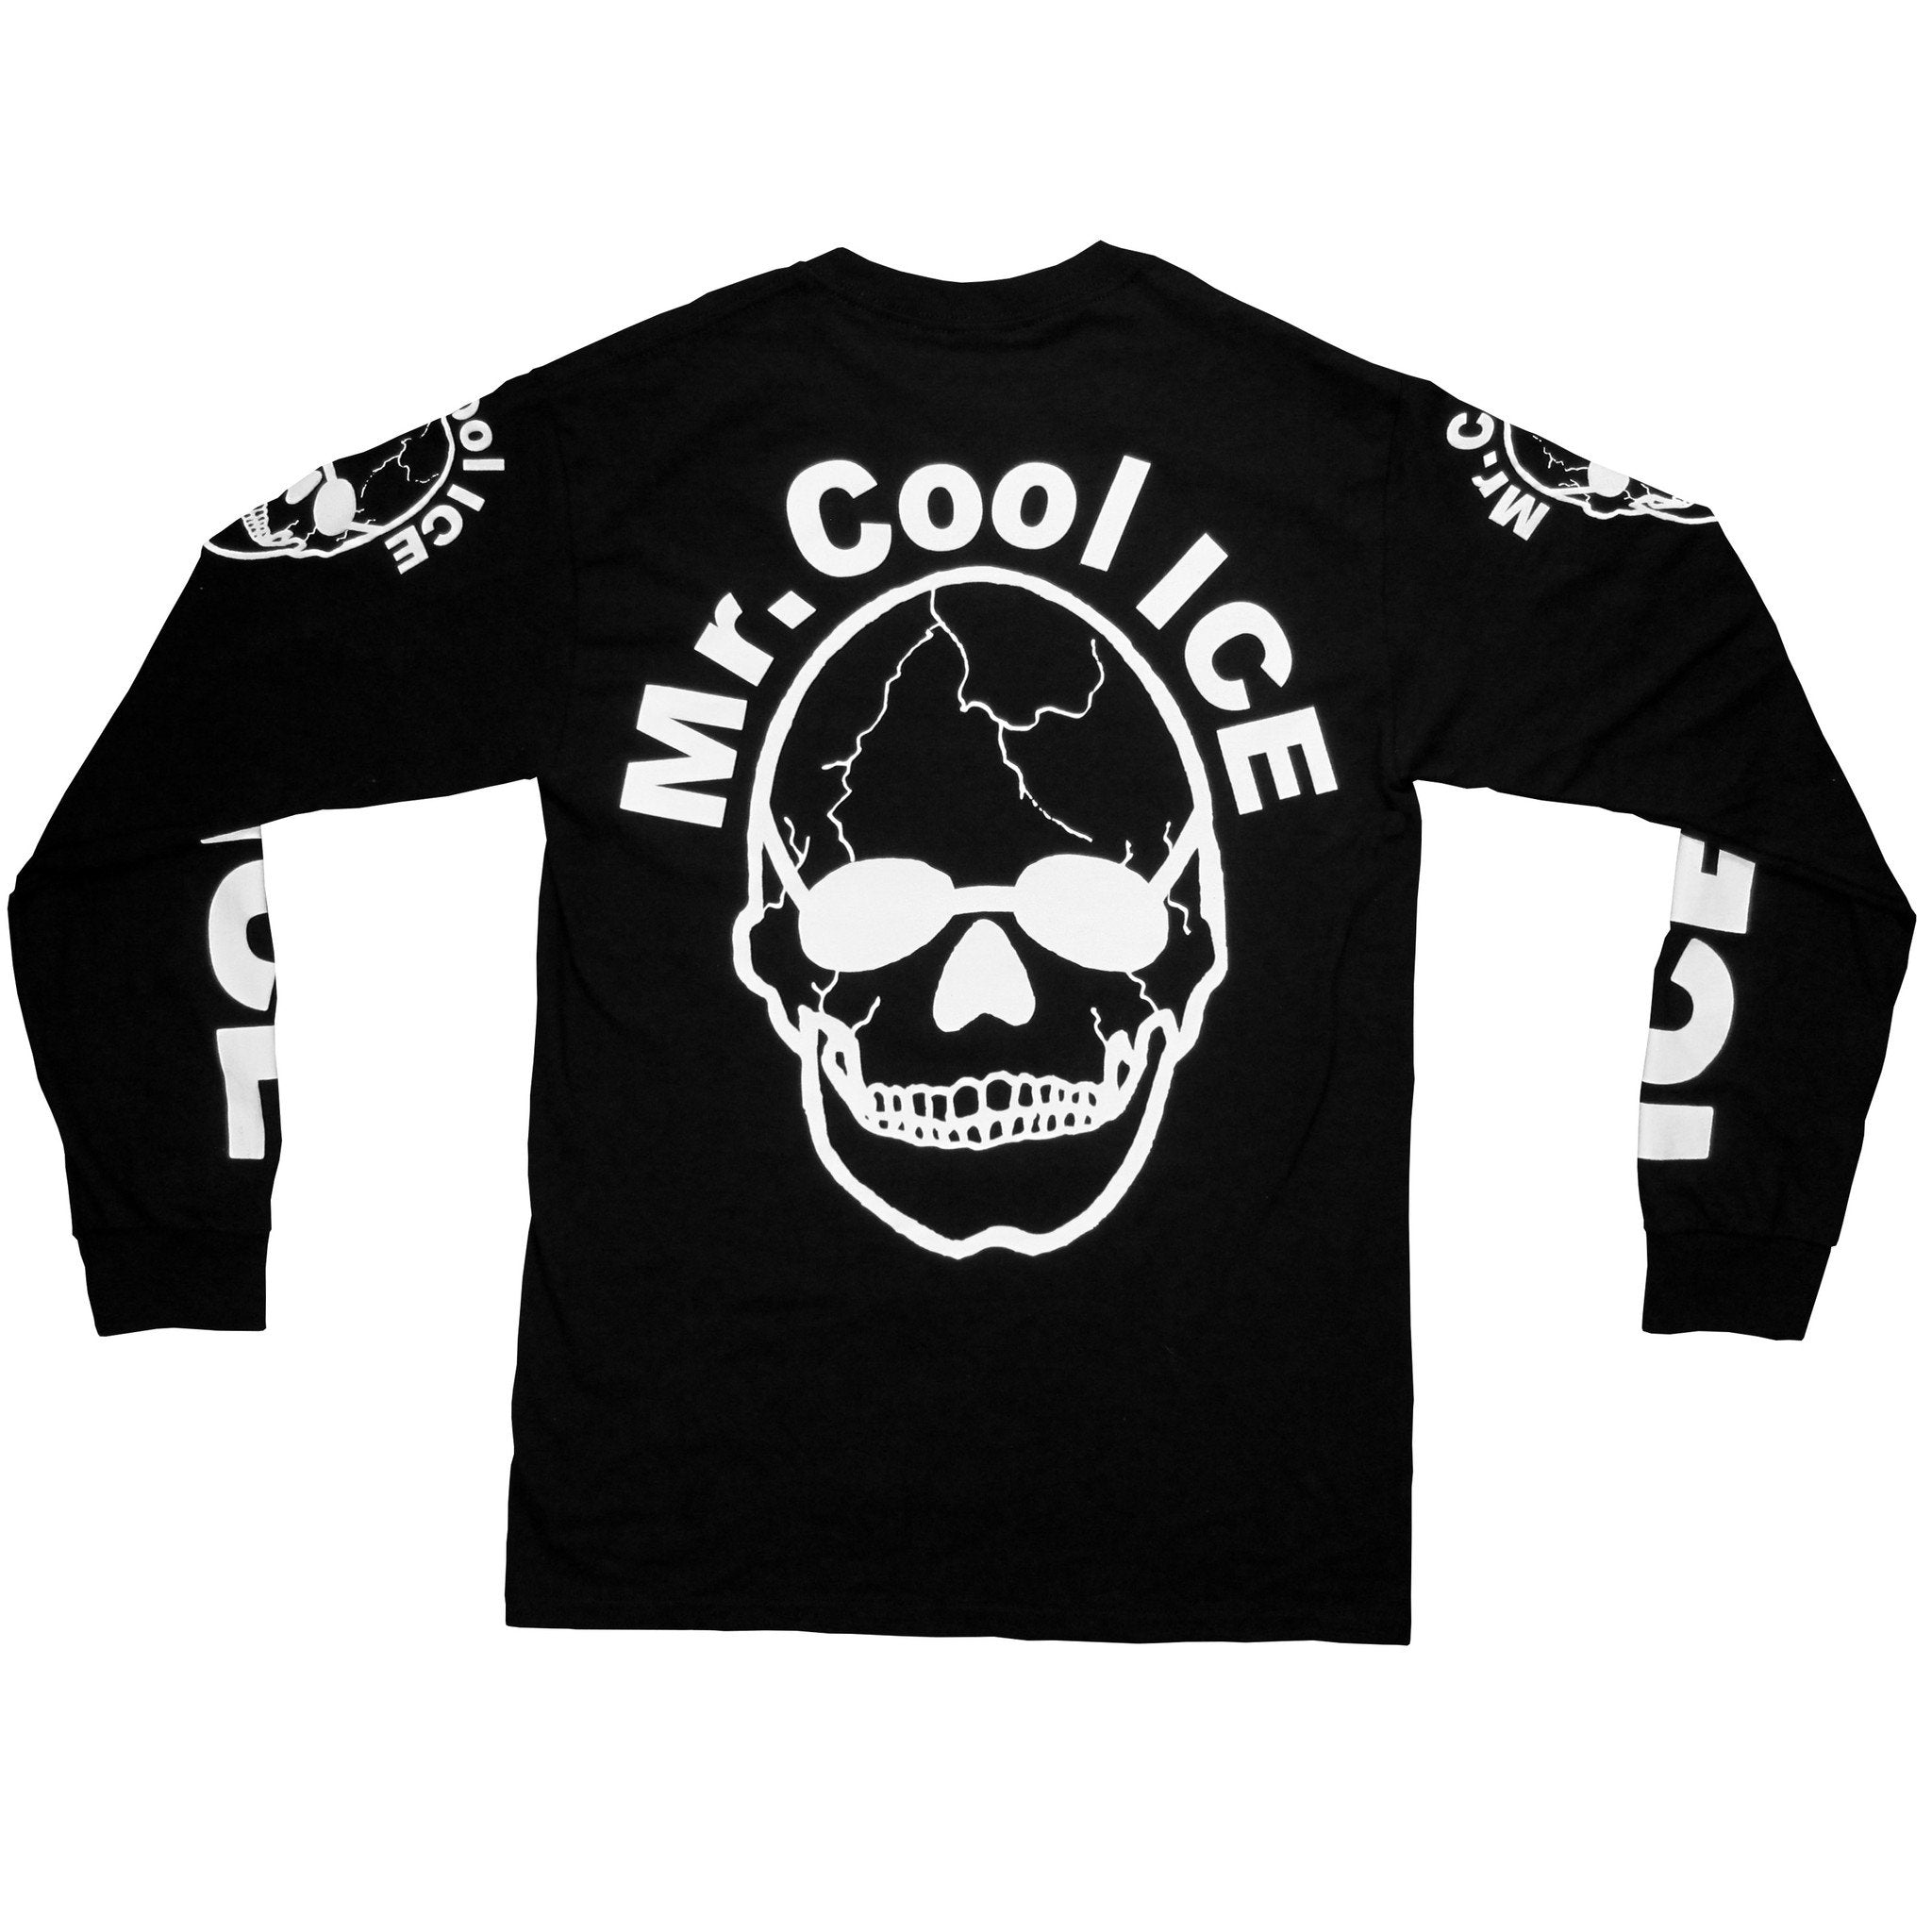 The "Mr. Cool Ice" shirt has prints all over. This is the back of the shirt, which has a big skull wearing sunglasses, and the text "Mr. Cool Ice".